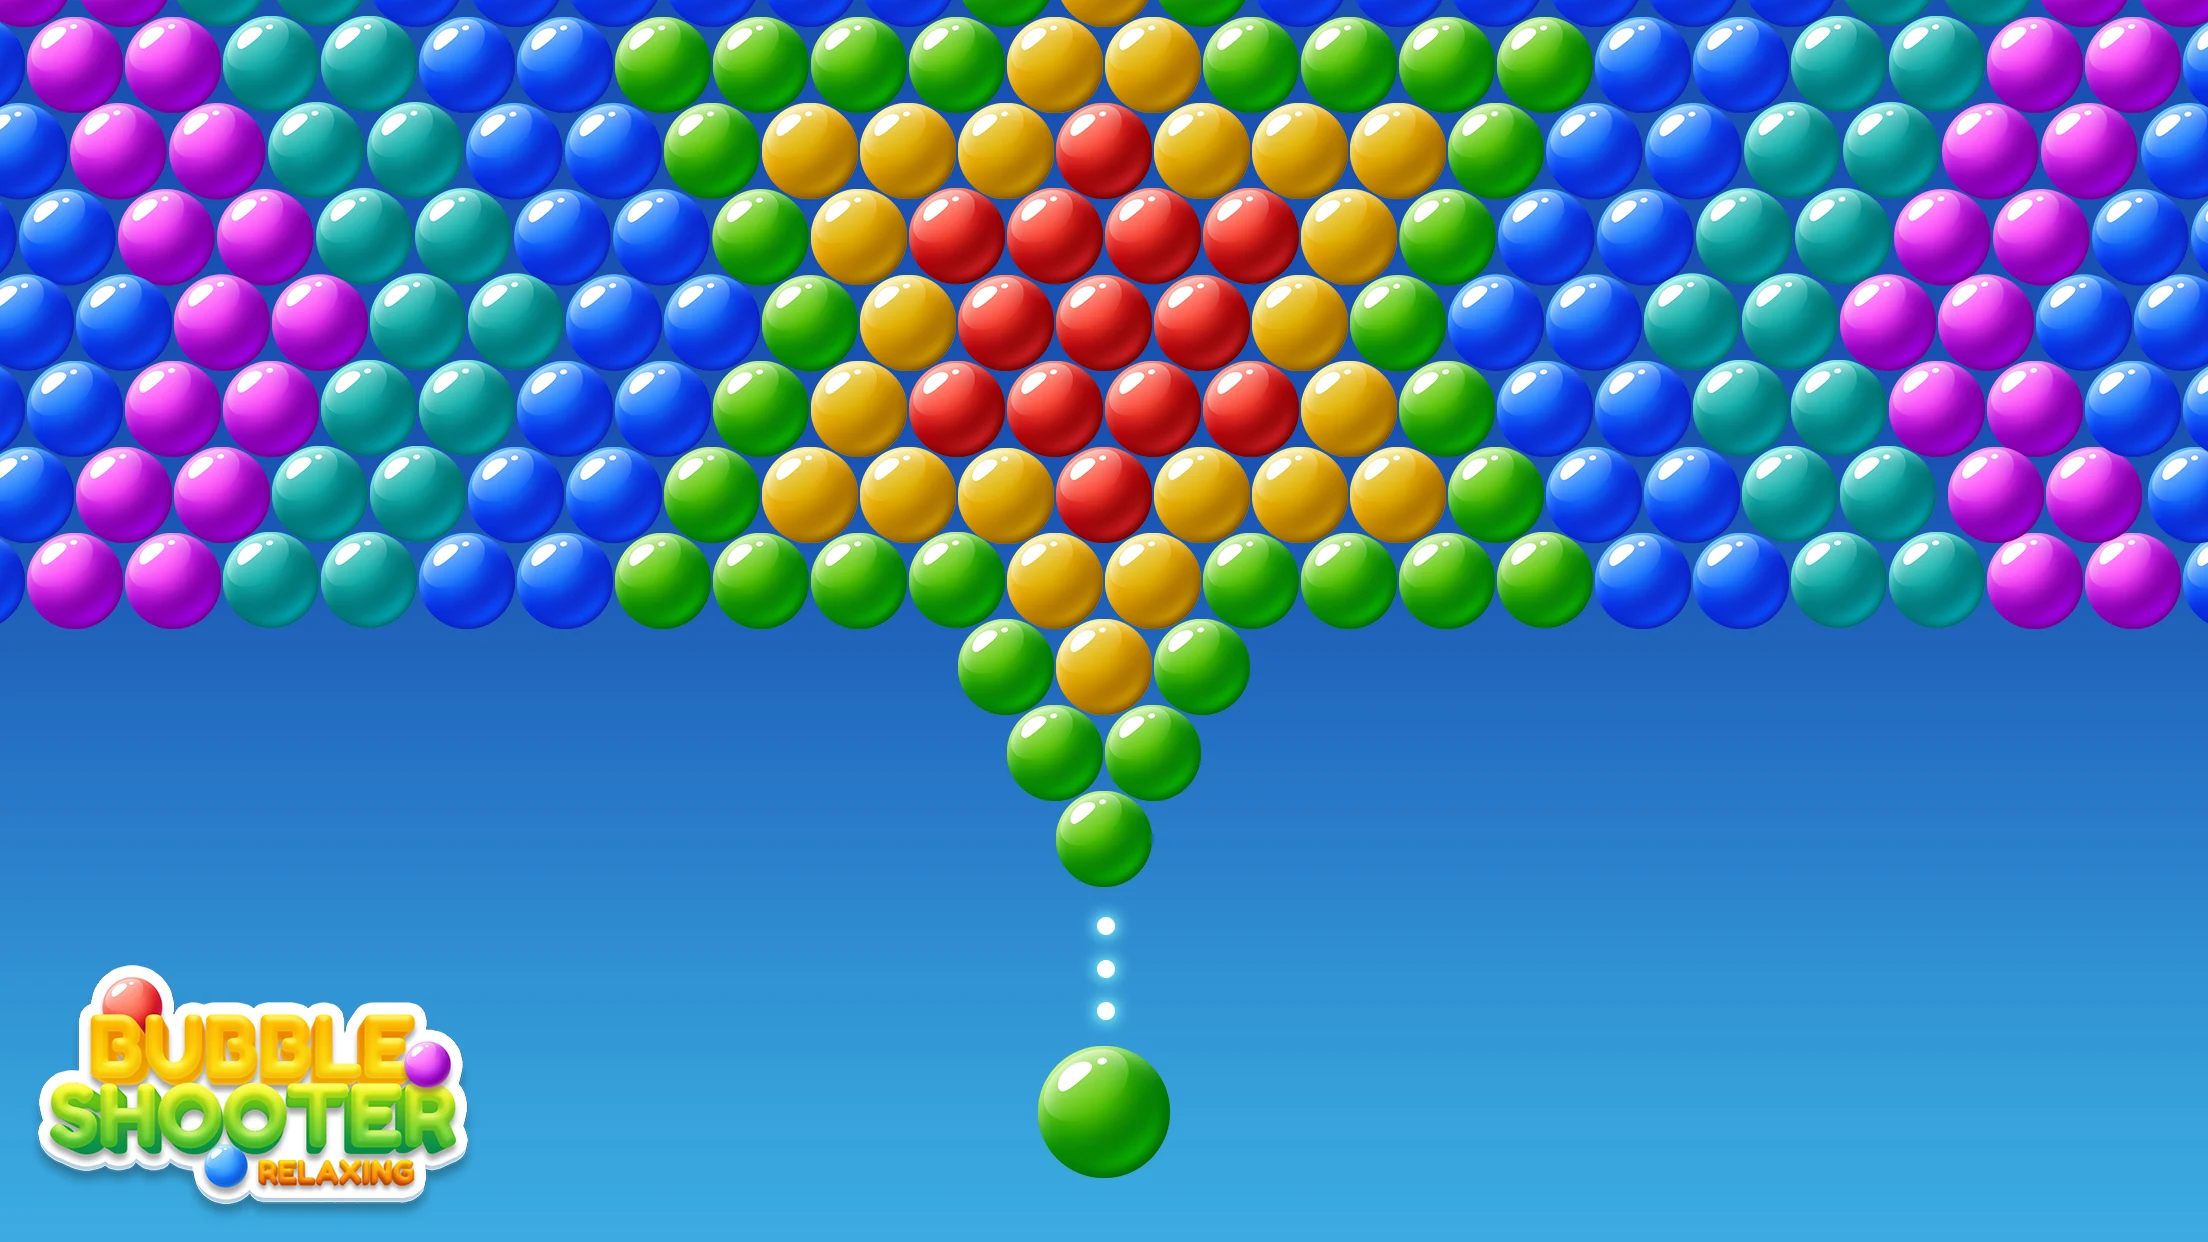 Download Bubble Shooter on PC with MEmu